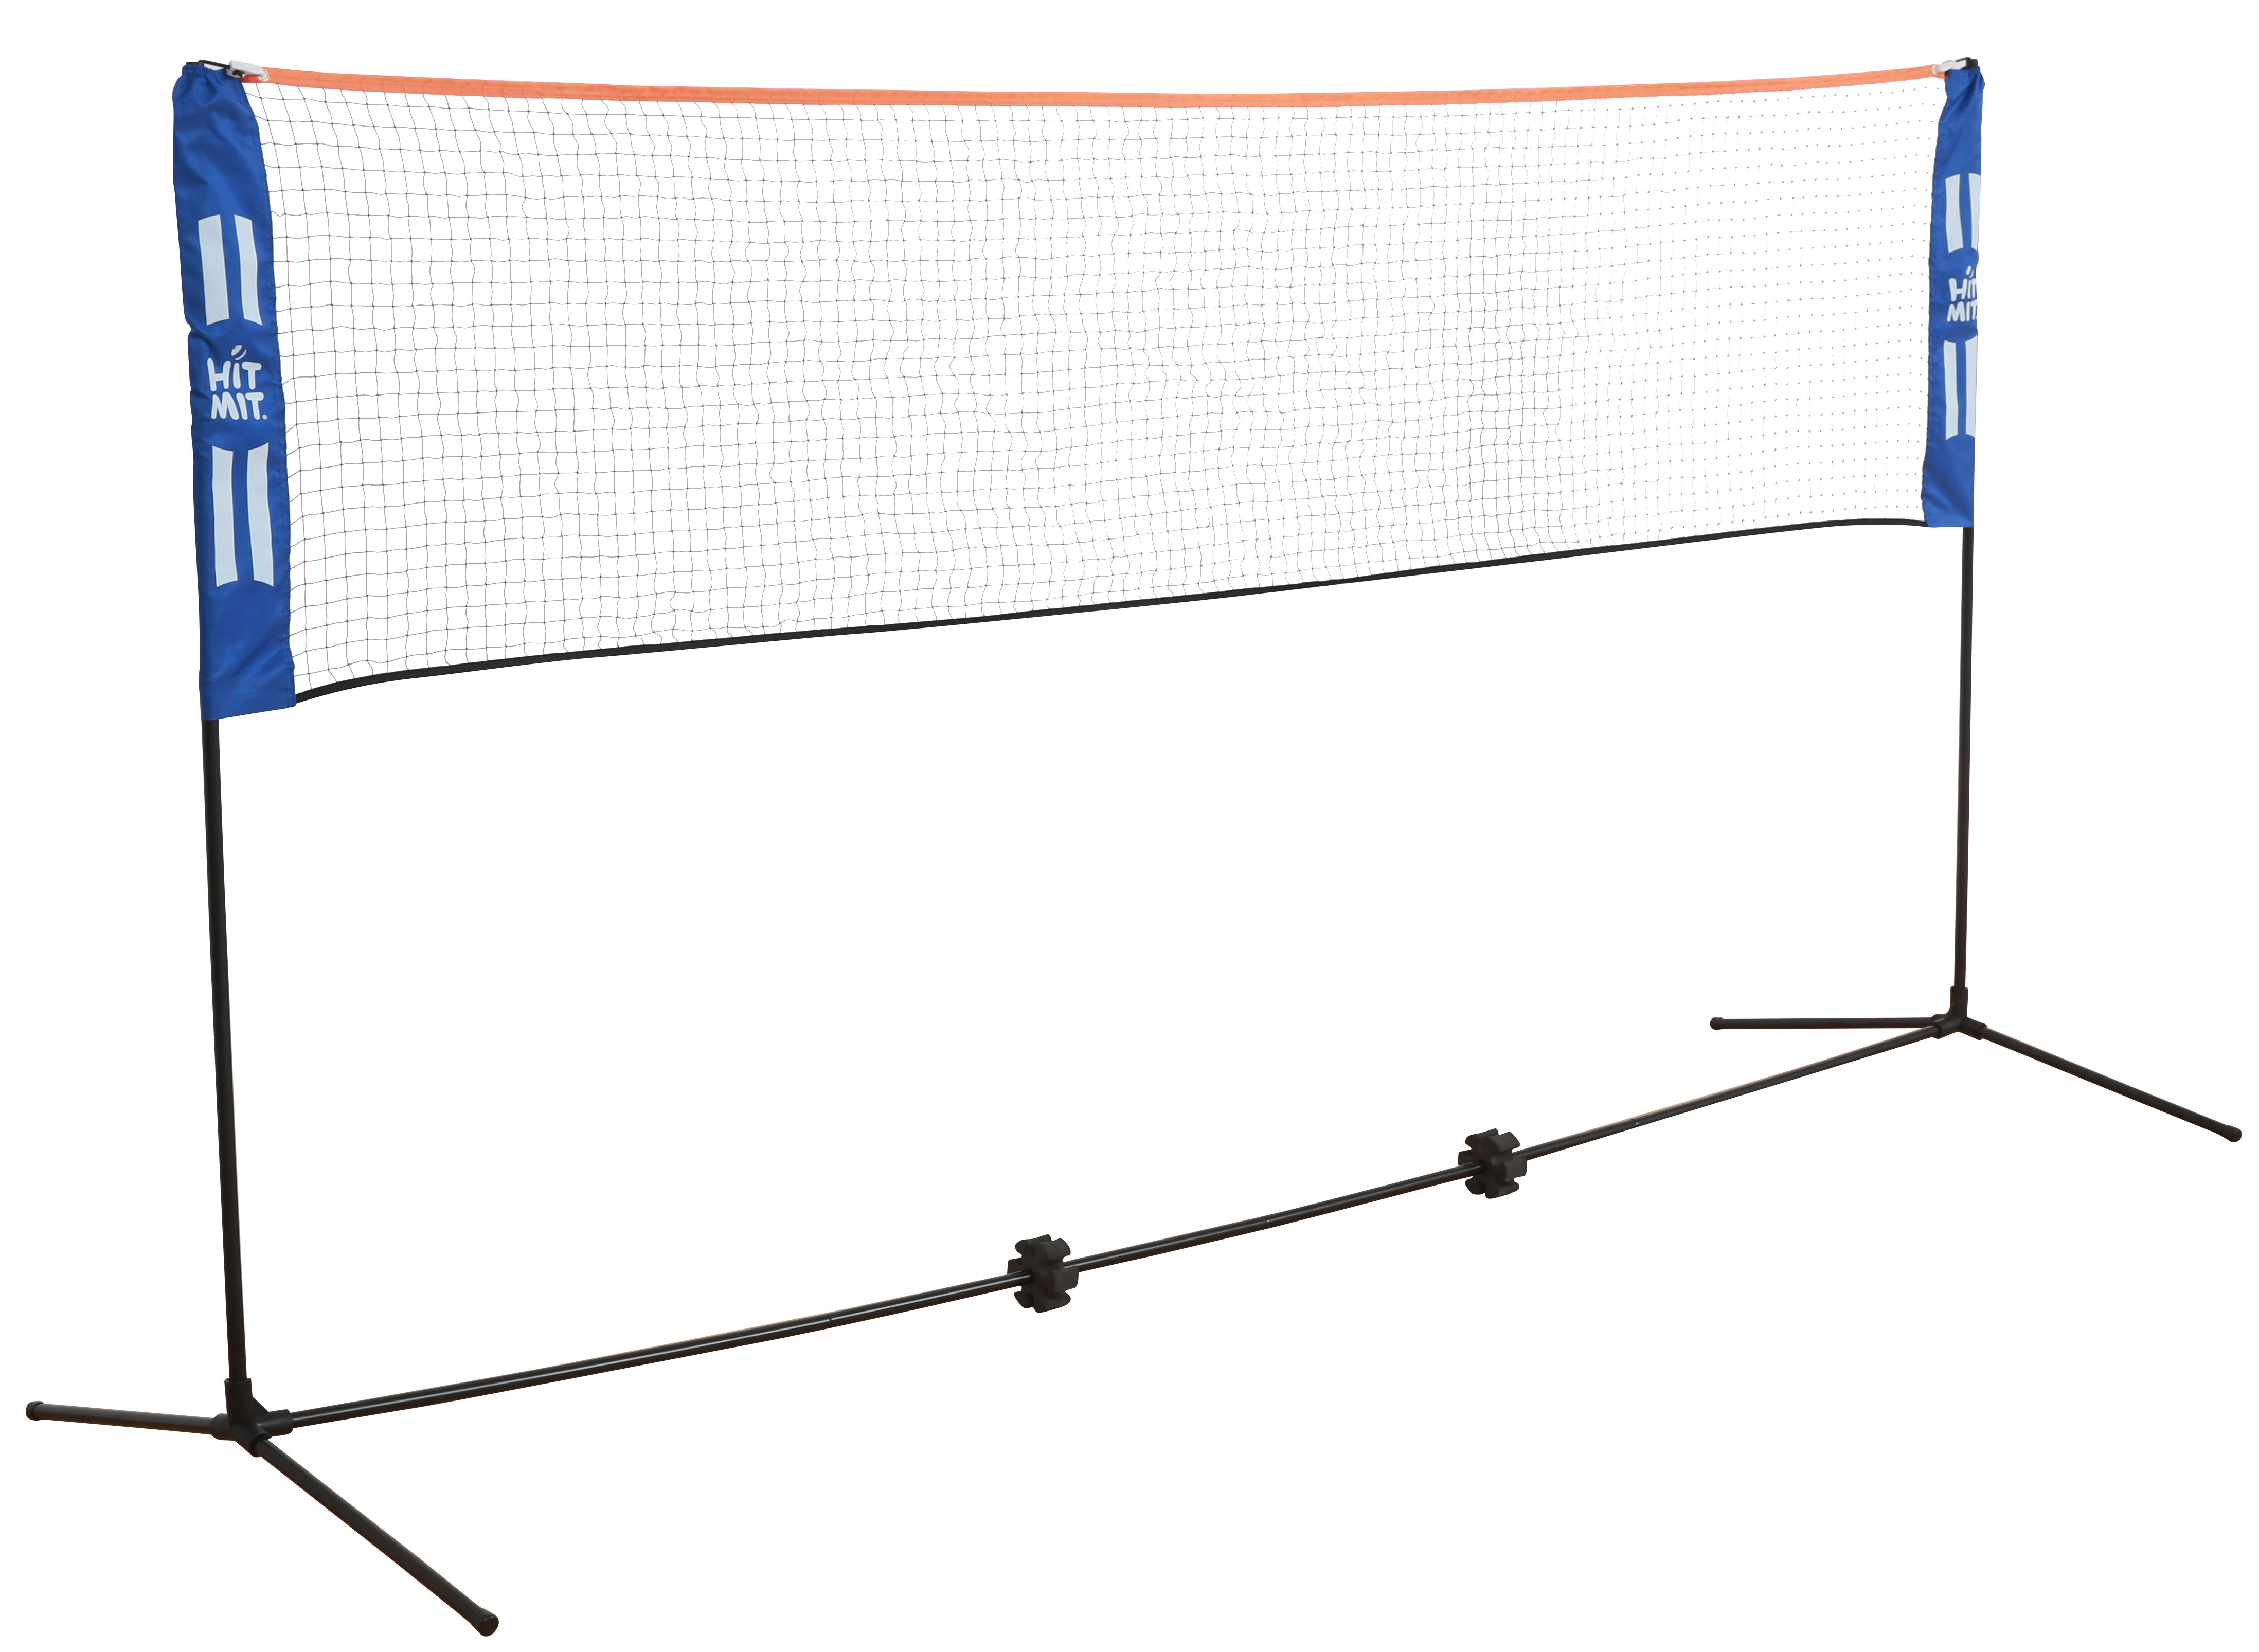 Adjustable Height Portable Badminton Net for Outdoor/Indoor Court Pickleball Tennis With Carry Bag Backyard Kids Volleyball Beach 